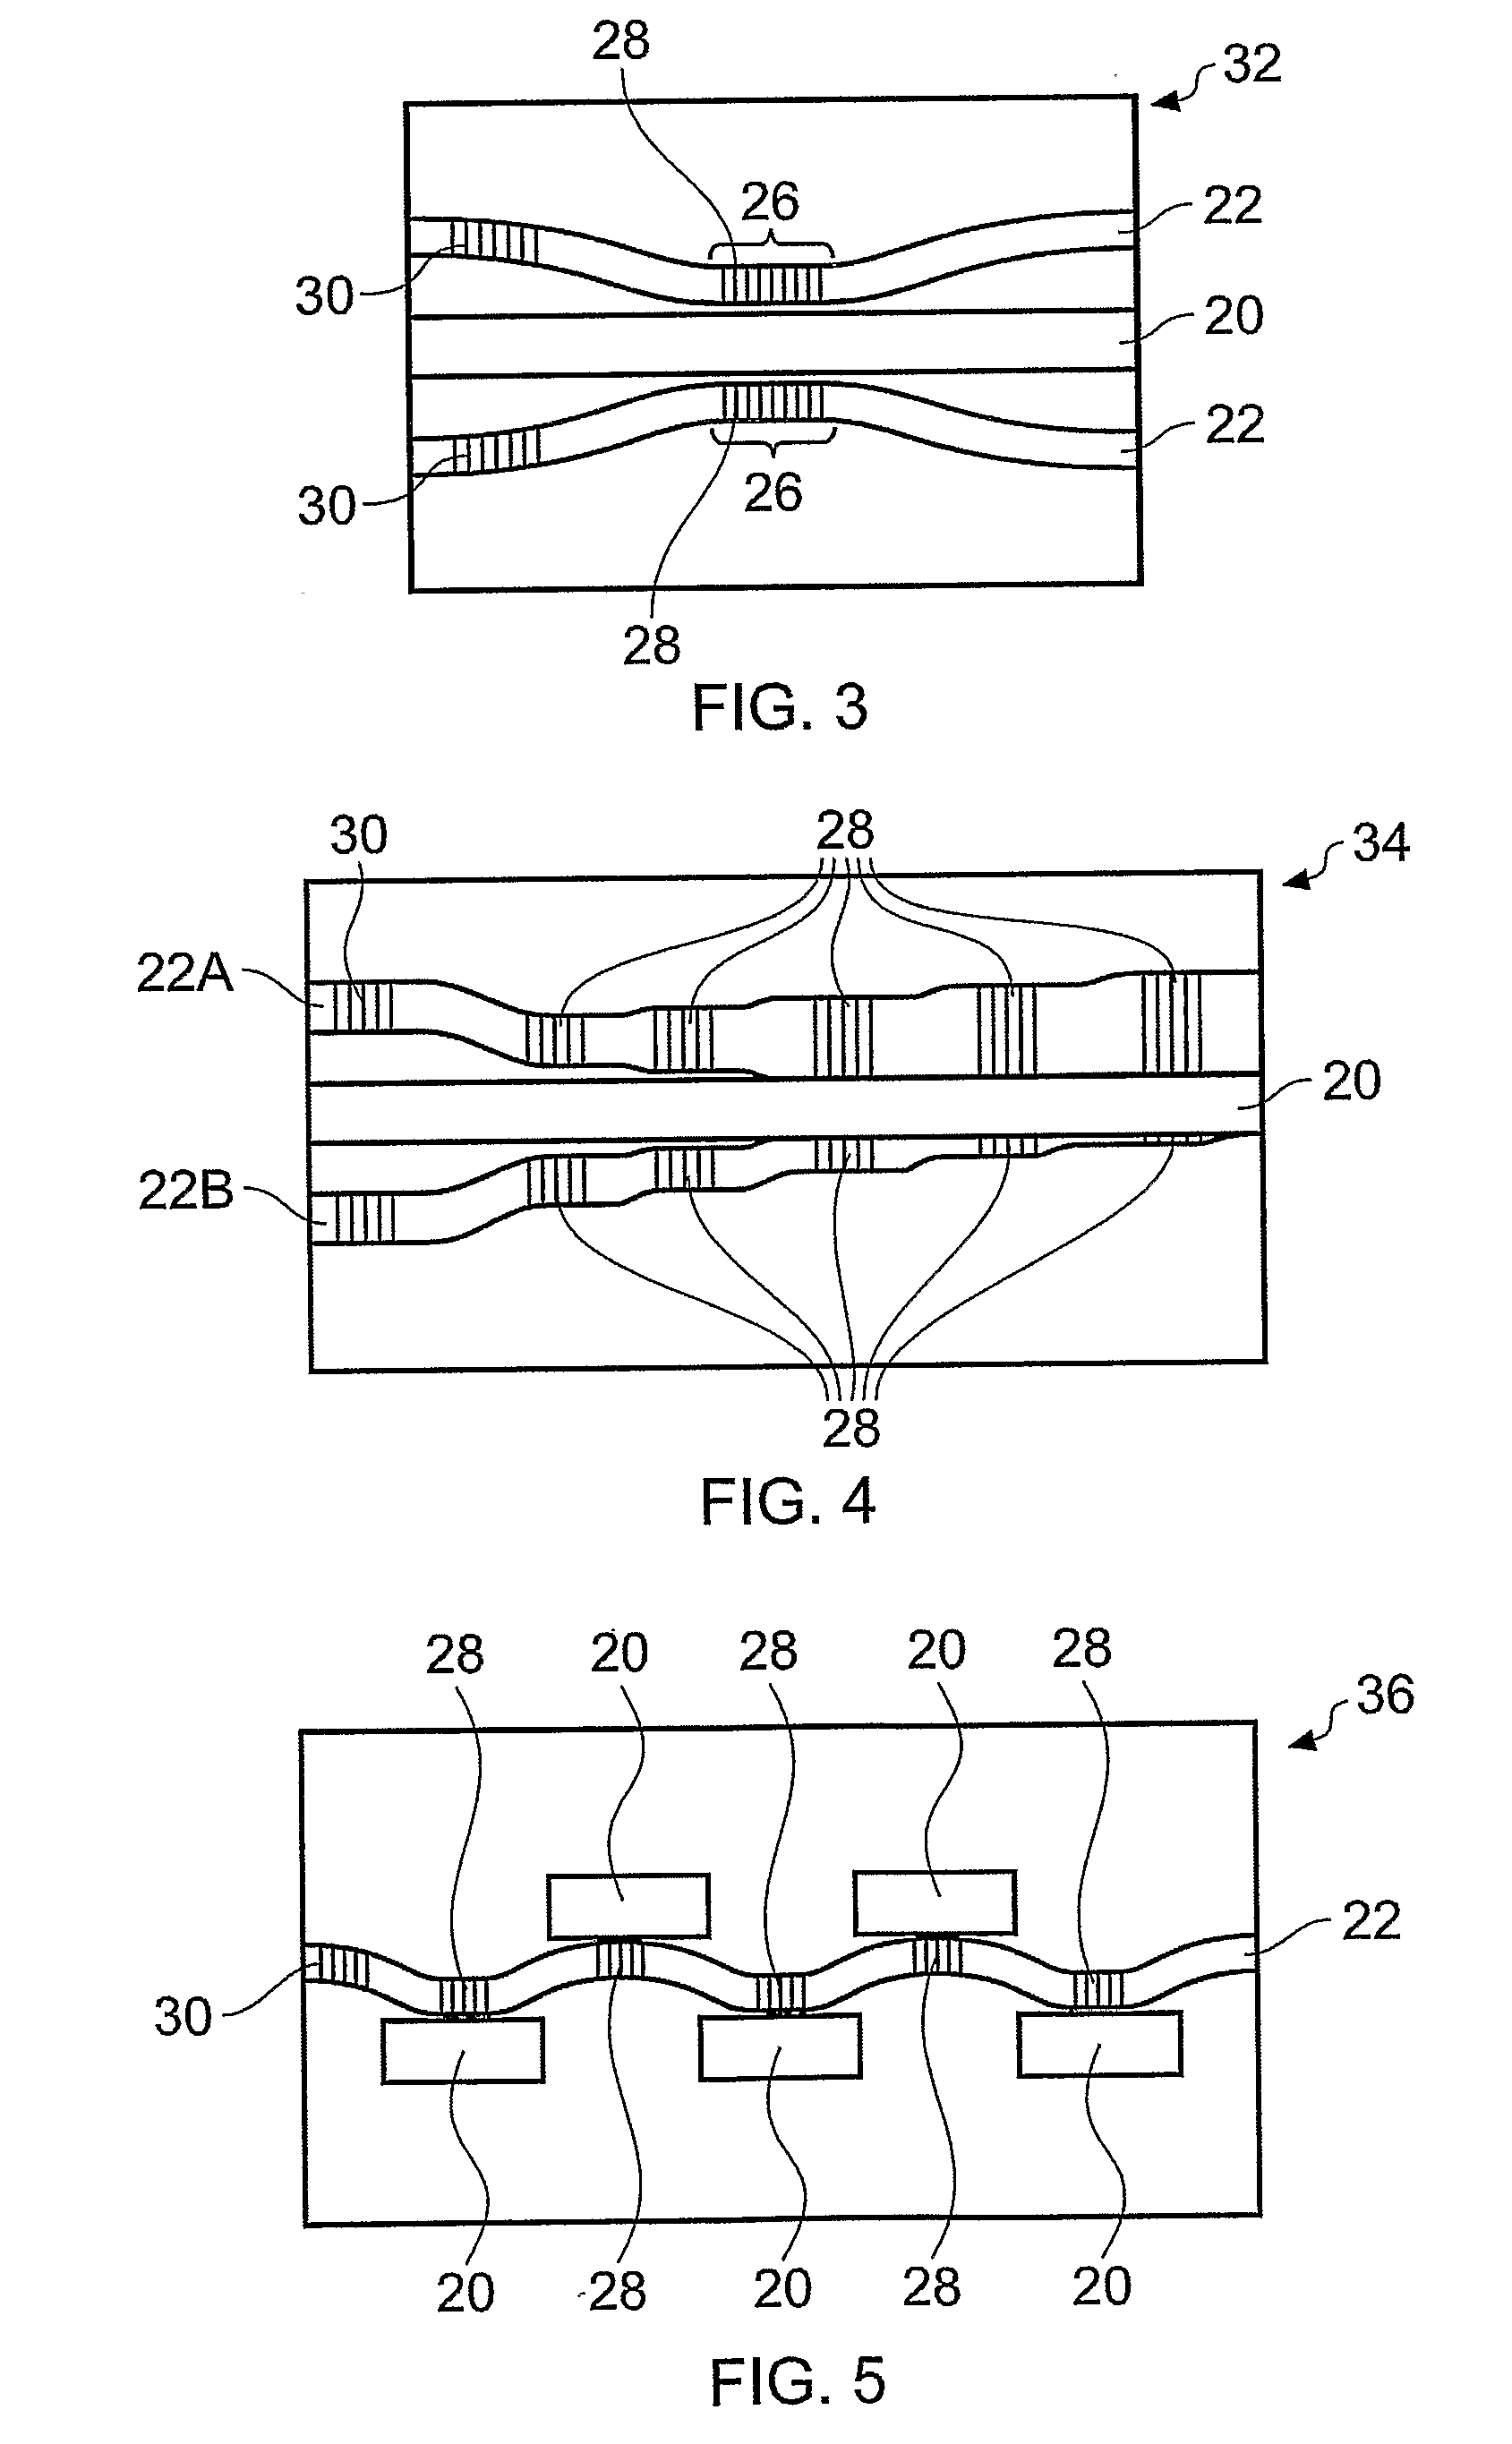 Waveguide devices using evanescent coupling between waveguides and grooves